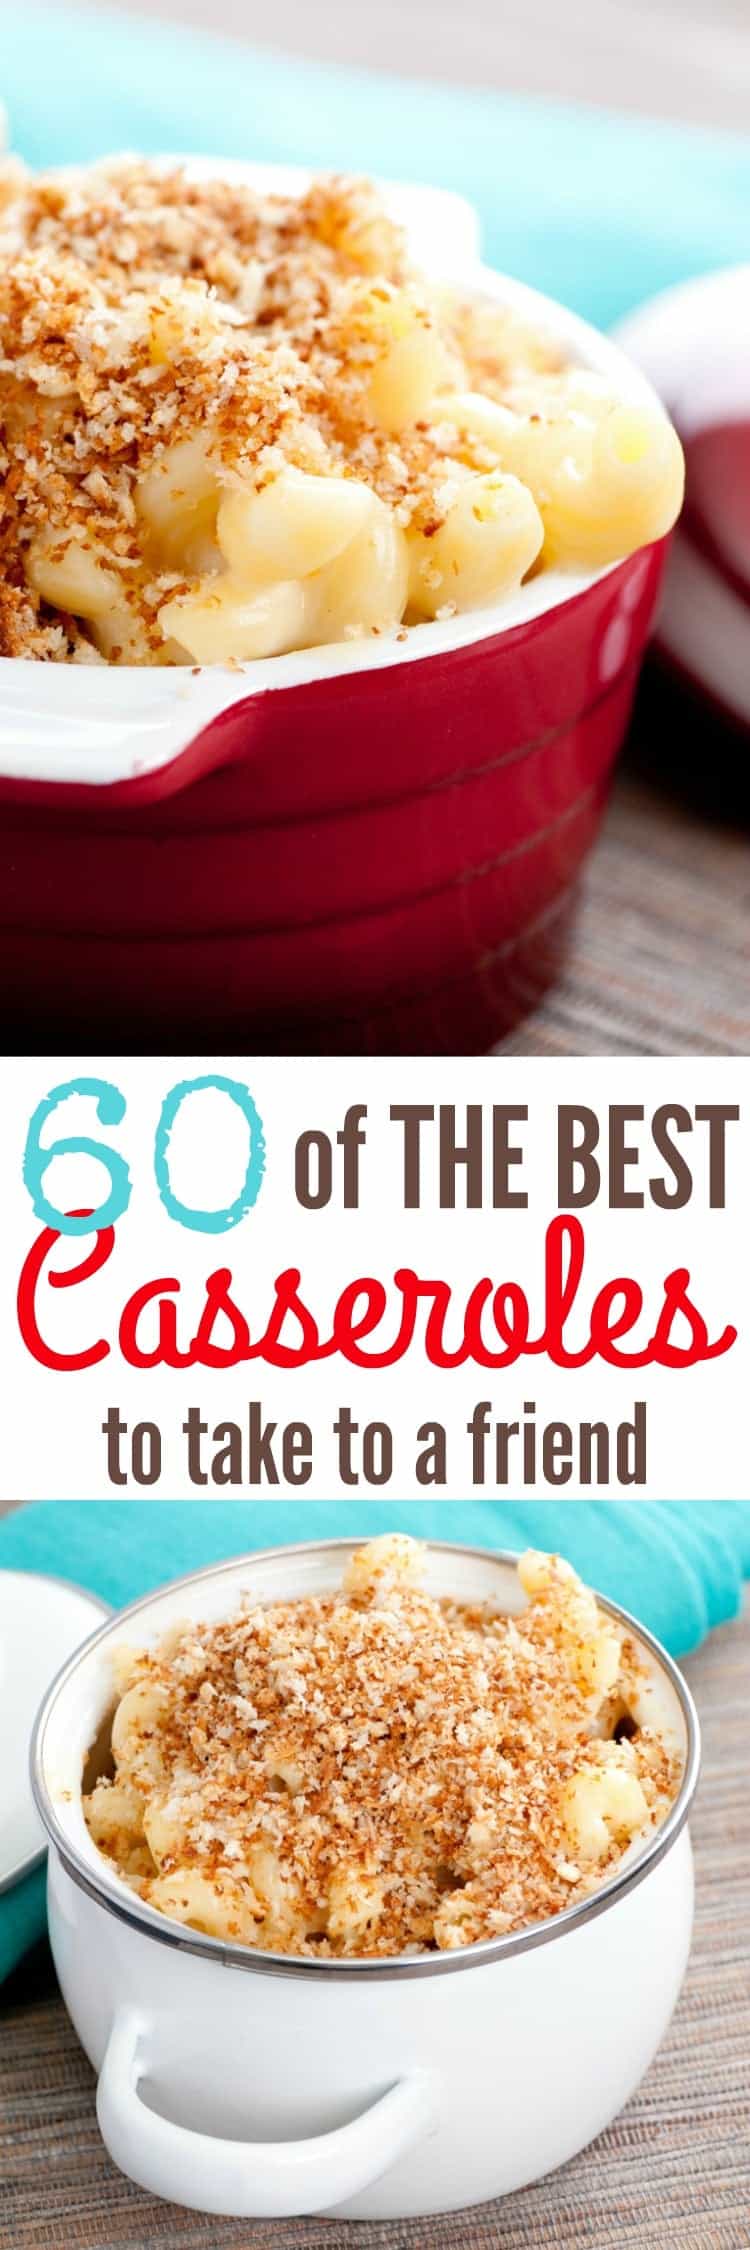 The Best Casseroles to Take to a Friend